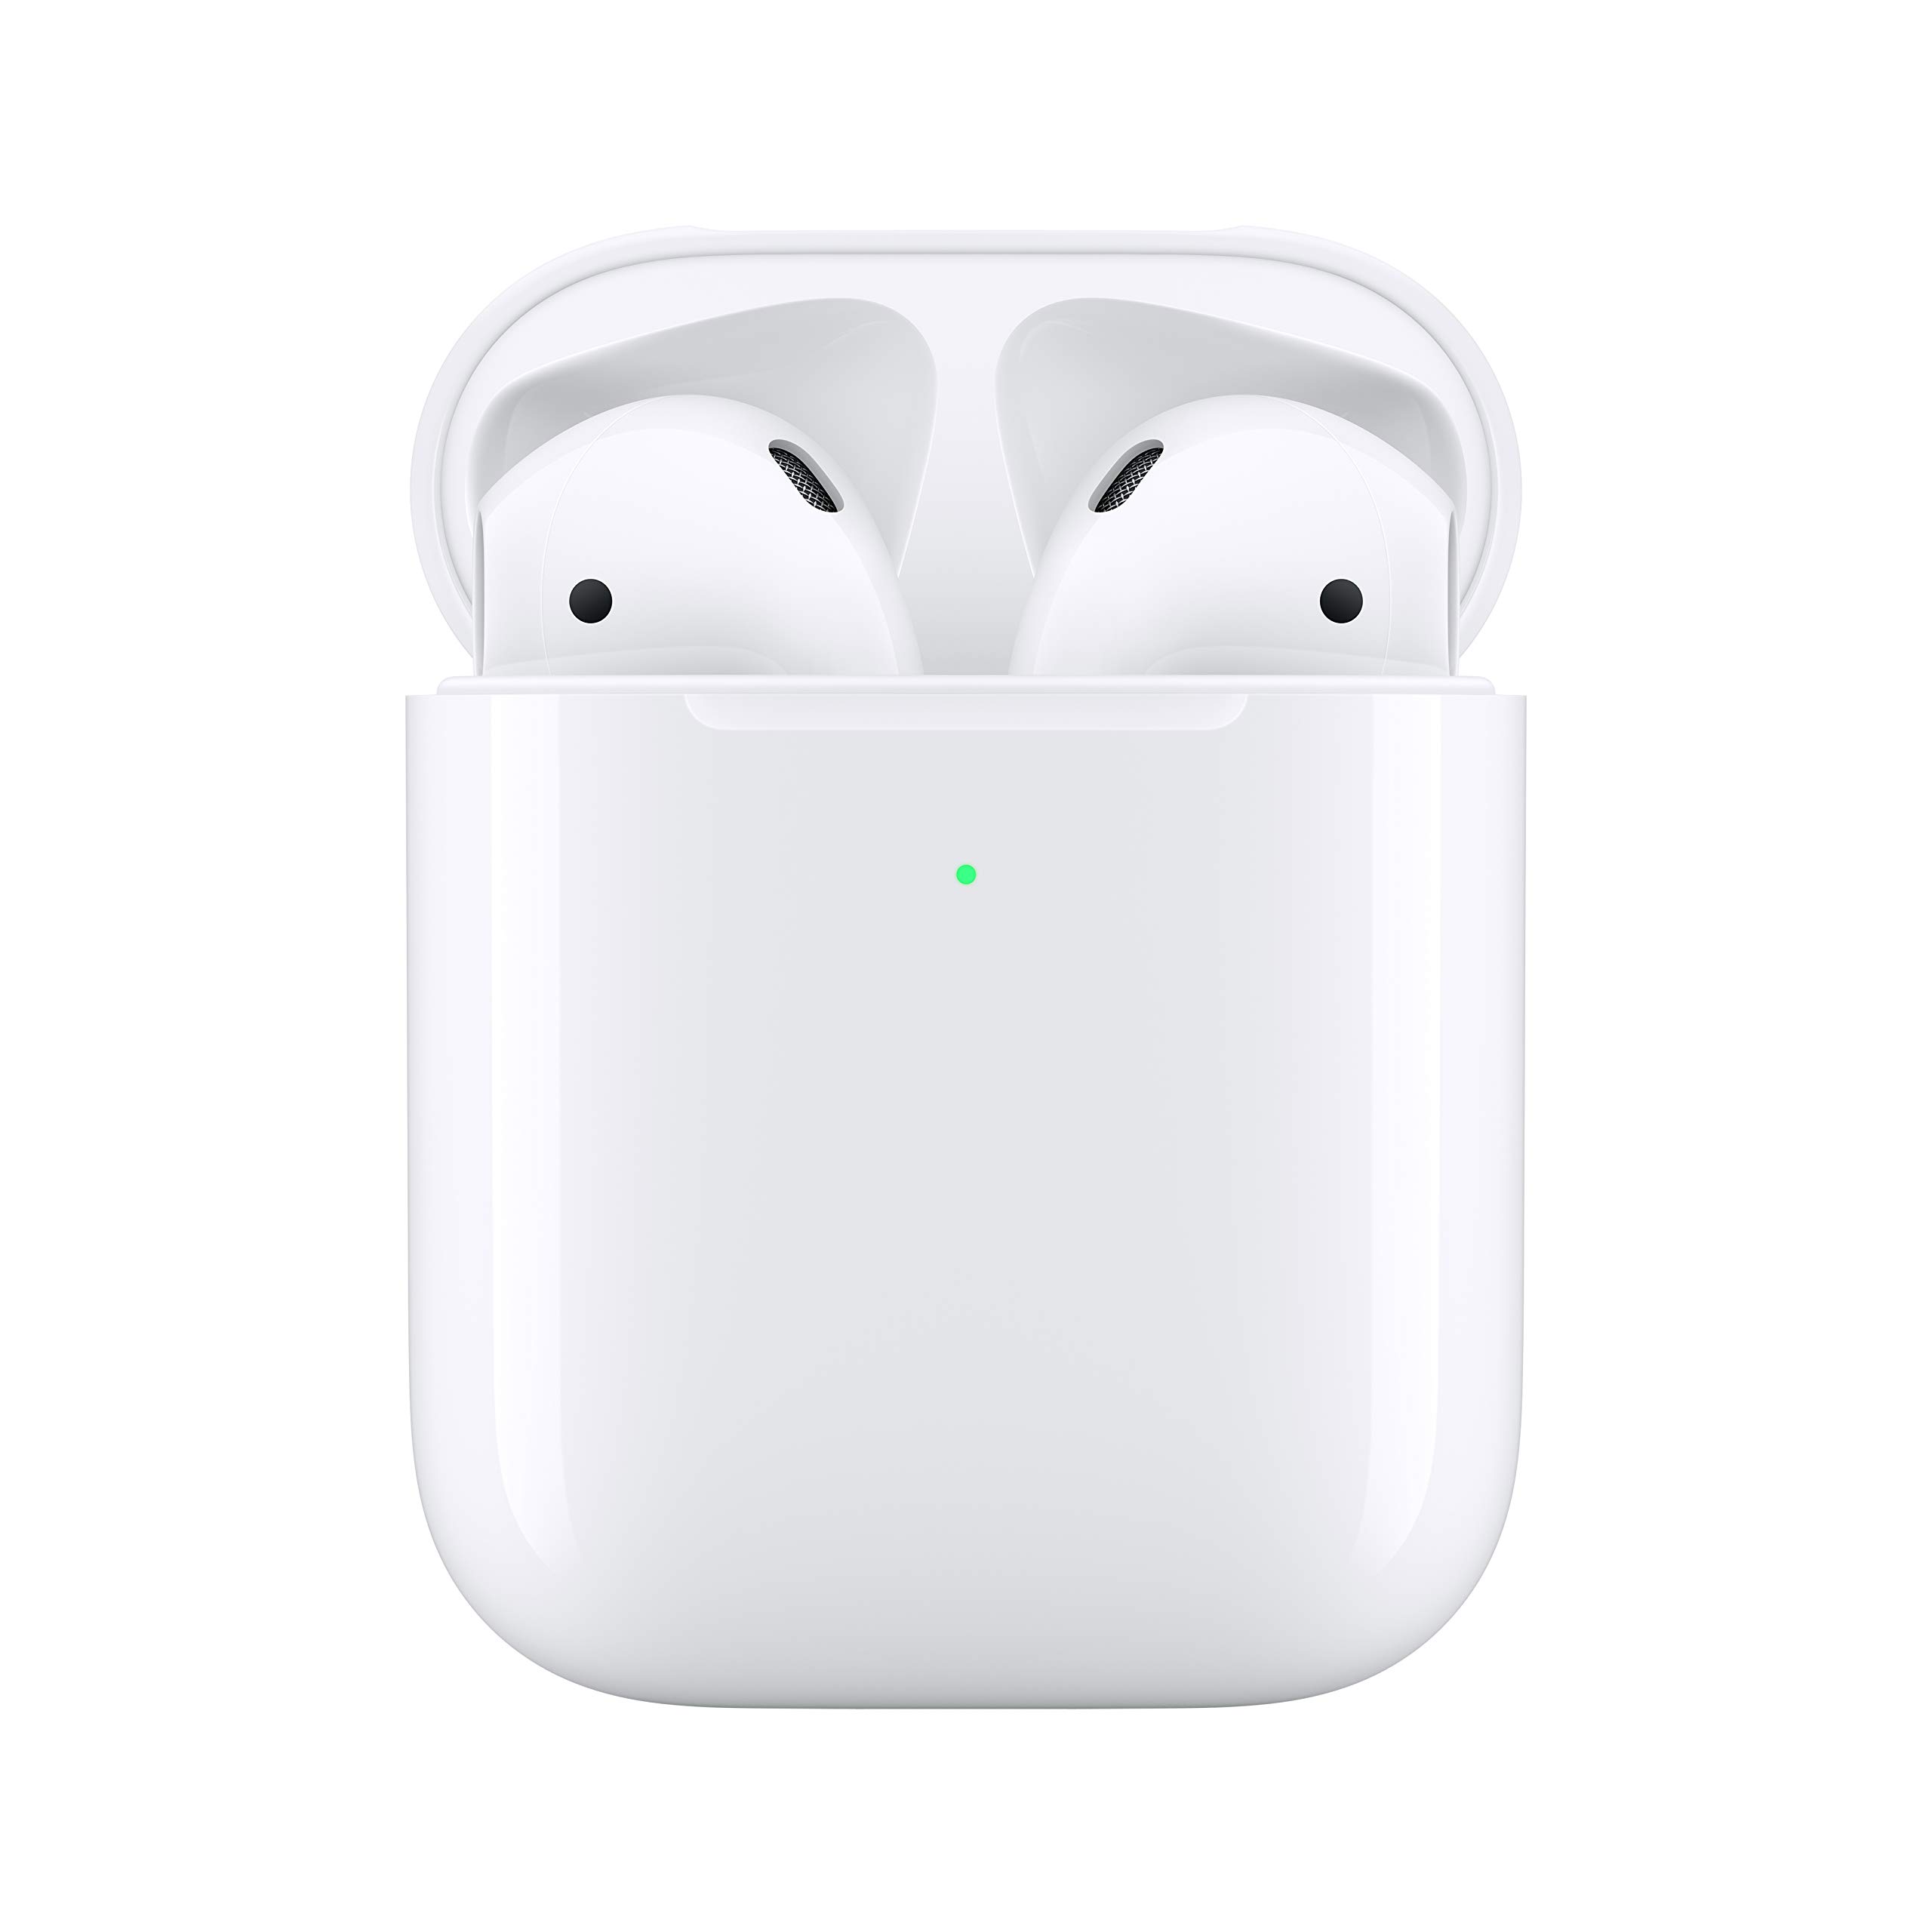 Apple AirPods with Wireless Charging Case $129 at Amazon